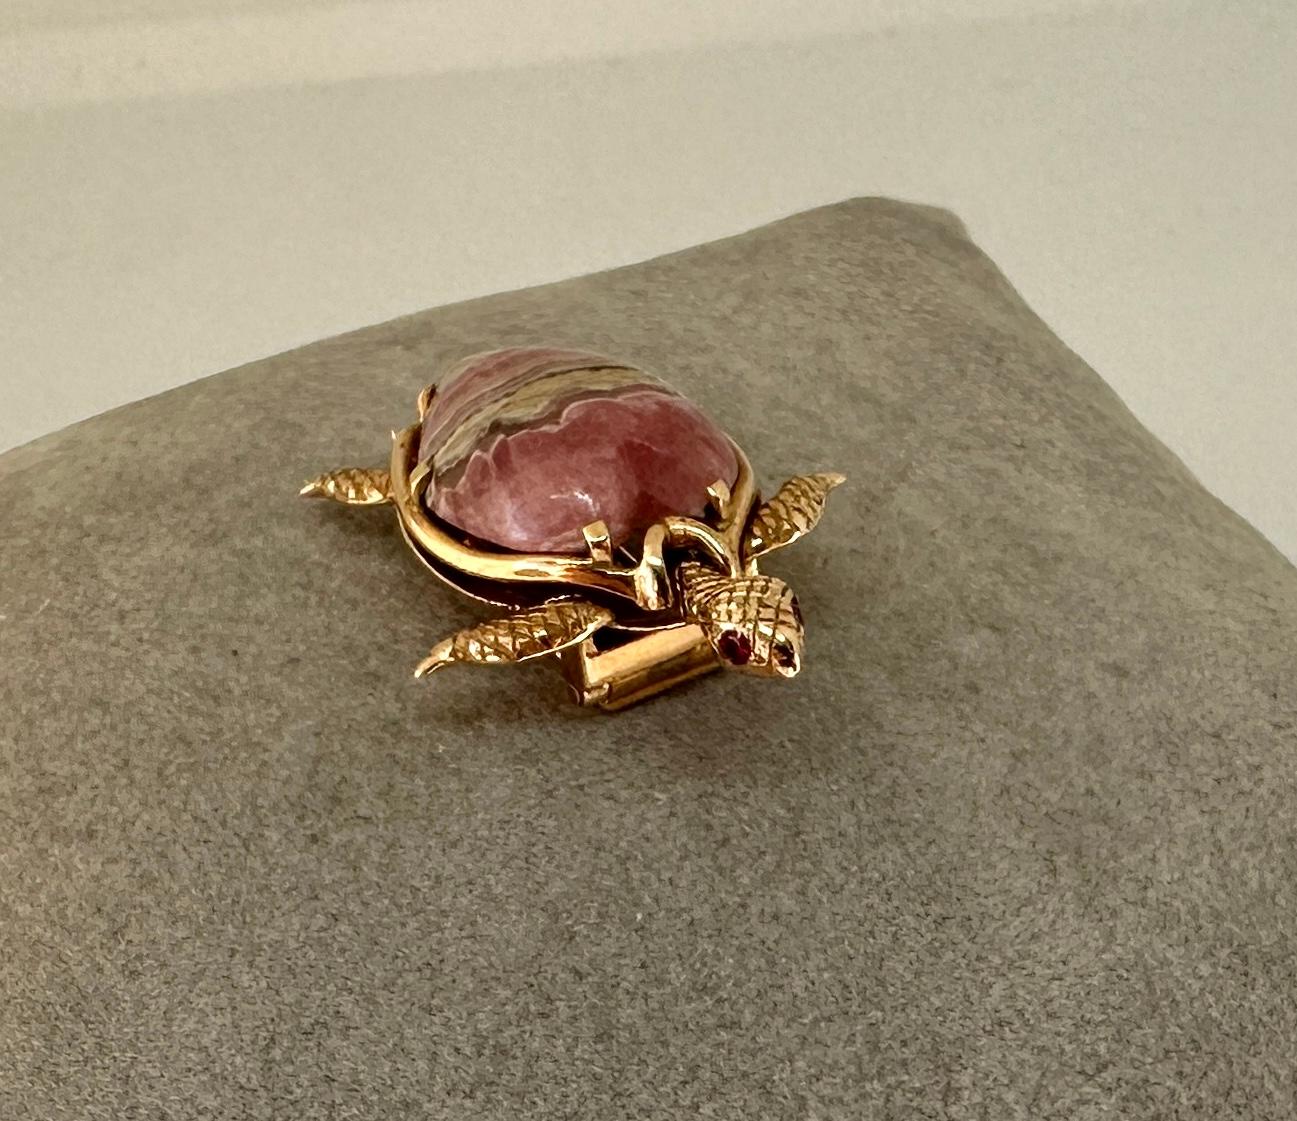 Turtle Tortoise Brooch Pin Ruby Pink Rhodochrosite 14 Karat Gold Mary Lou Daves In Excellent Condition For Sale In New York, NY